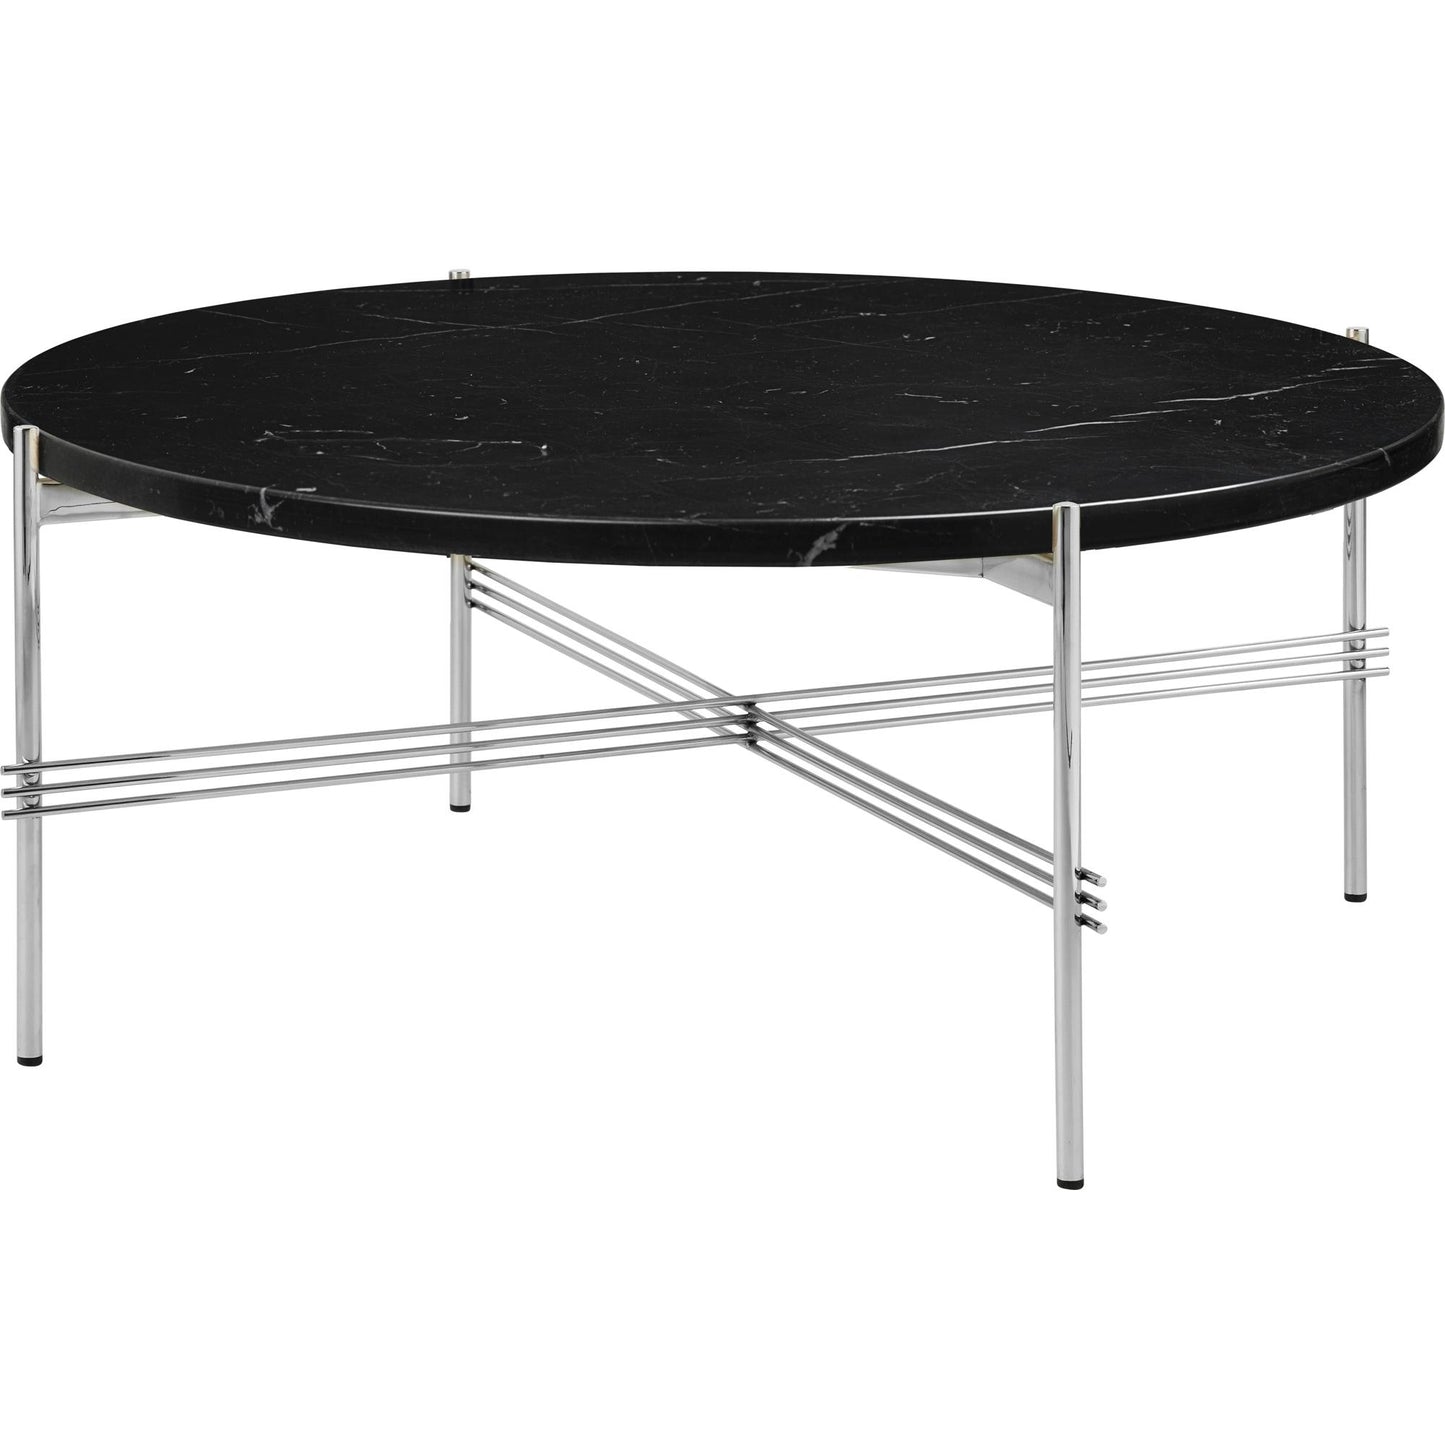 TS Coffee Table Round Ø80 by GUBI #Polished Steel/Black Marquina Marble